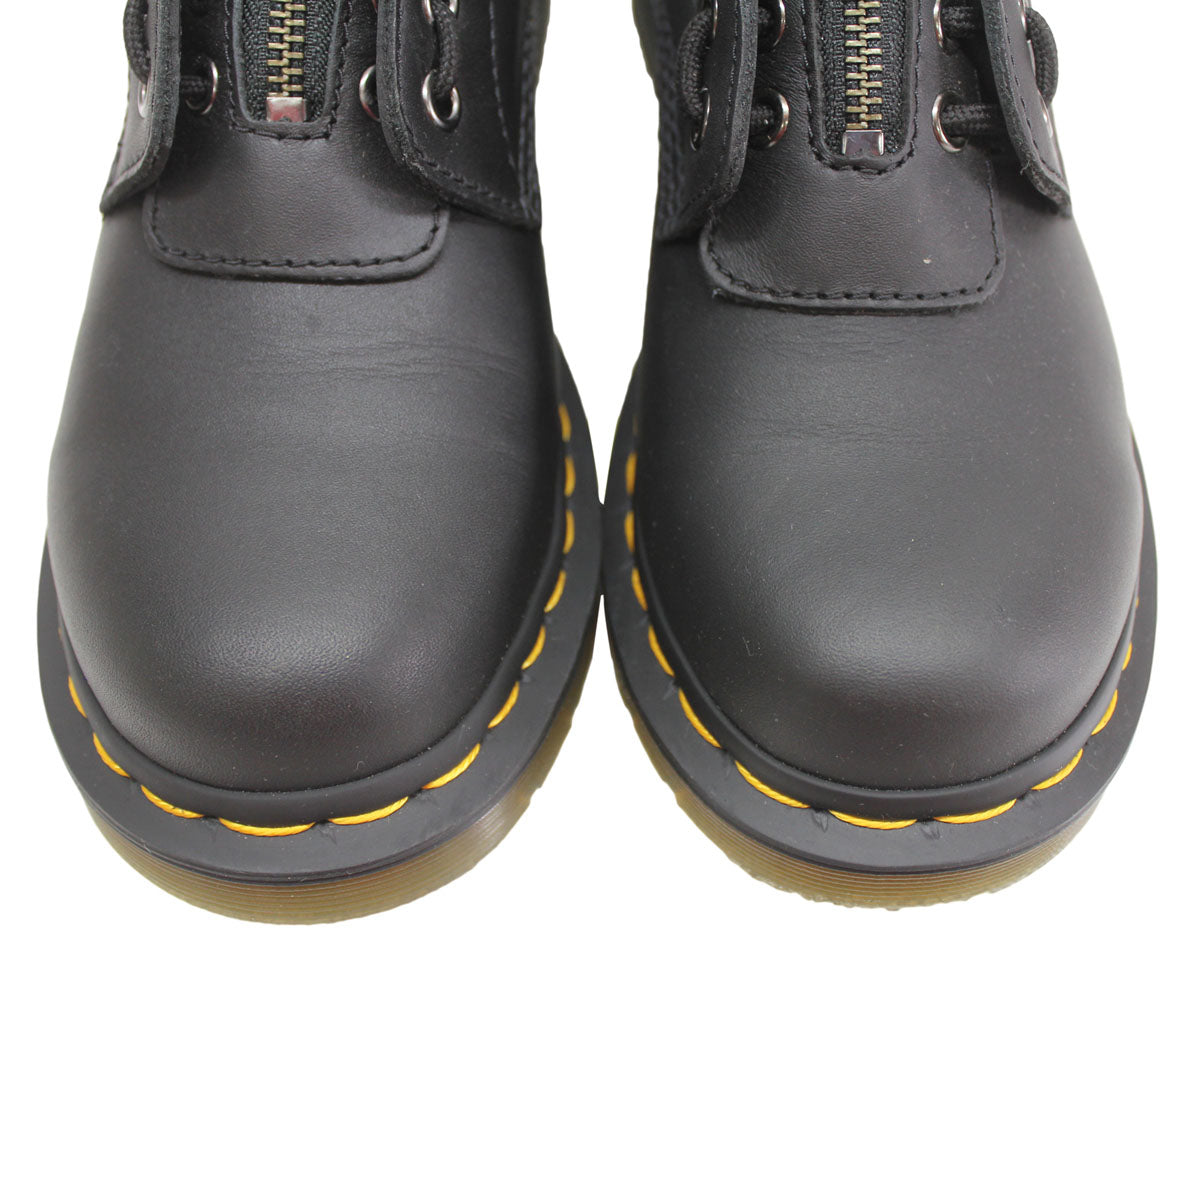 Dr. Martens Womens 1460 Pascal Front Zip Nappa Leather Boots - UK 6.5